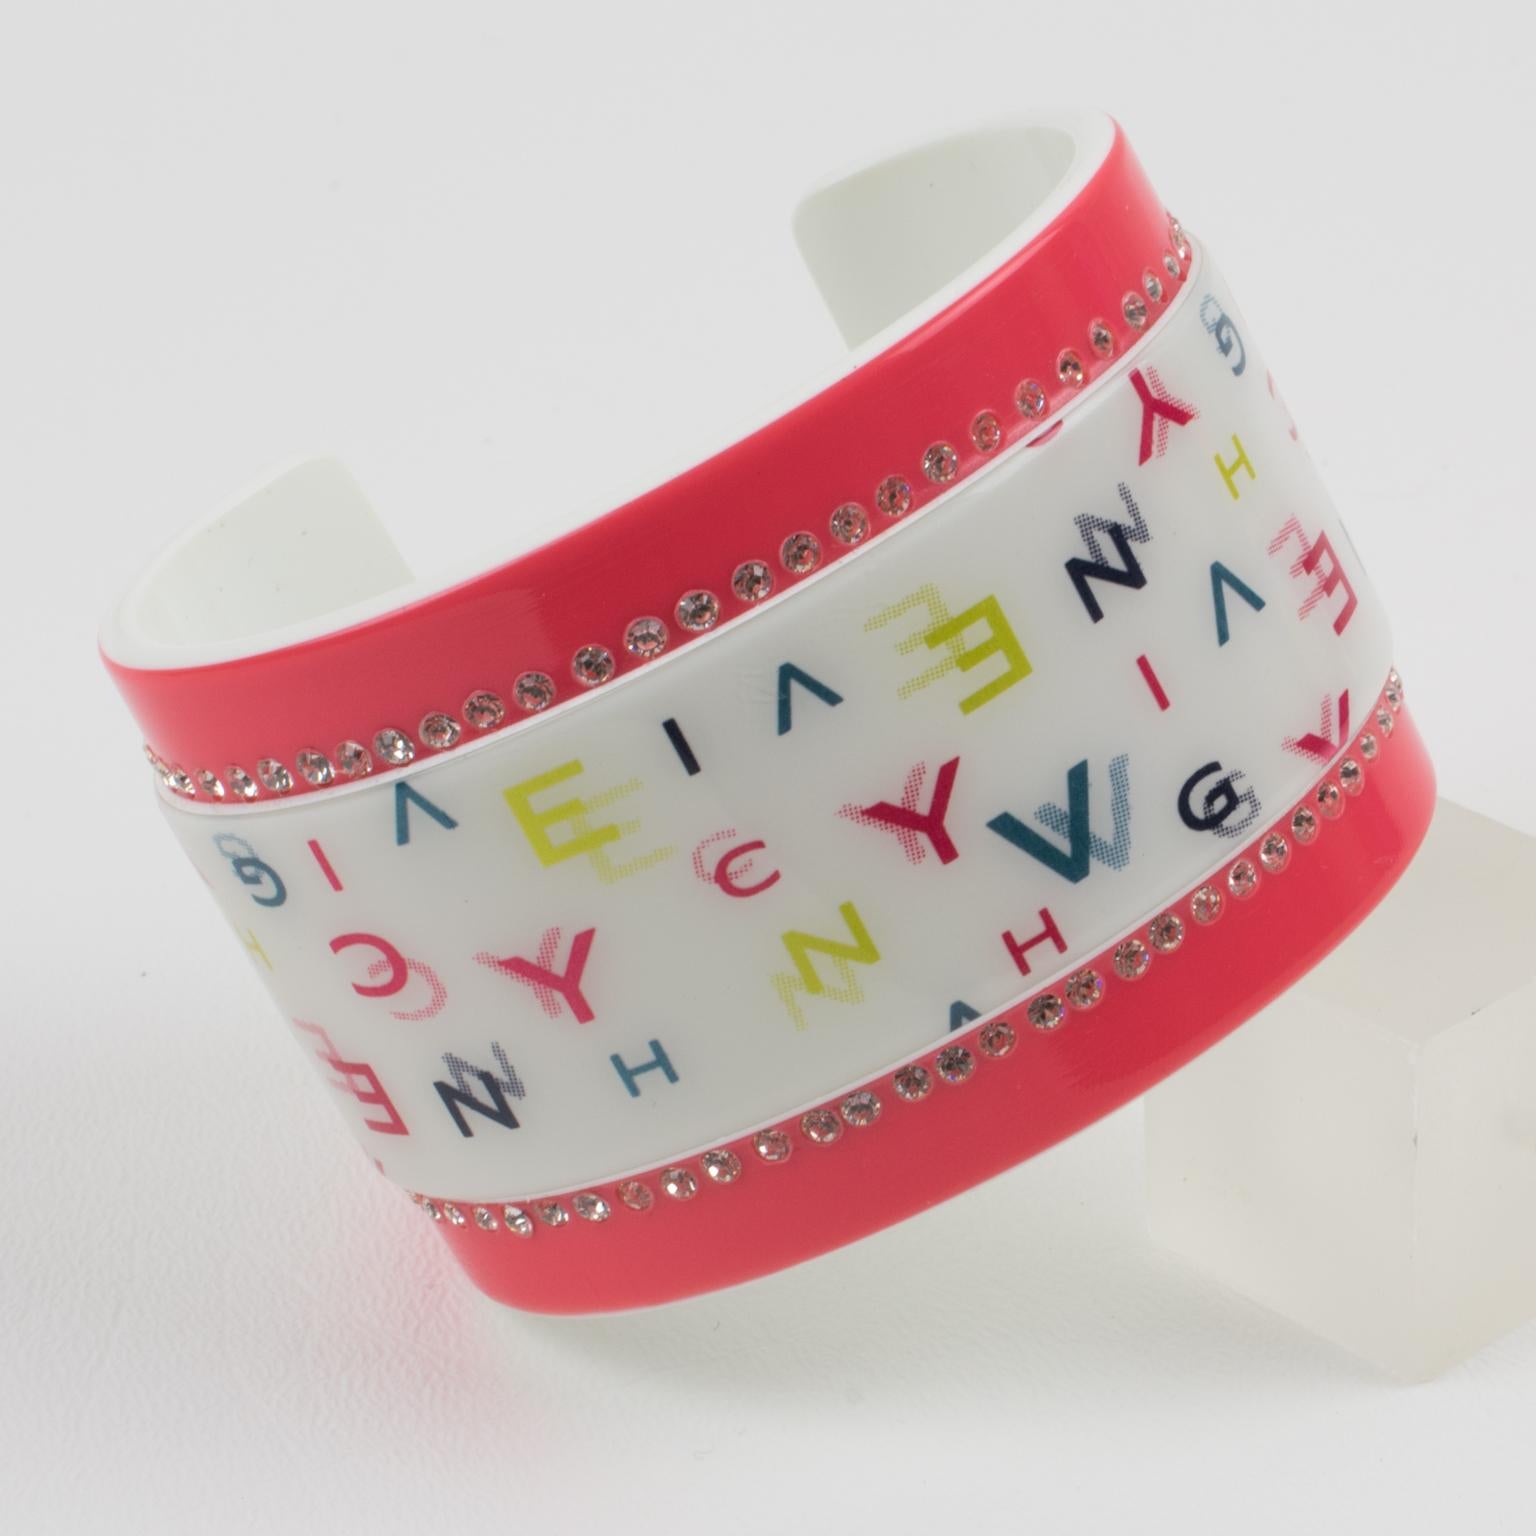 Givenchy Pink and Multicolor Logo Jeweled Resin Cuff Bracelet For Sale 3